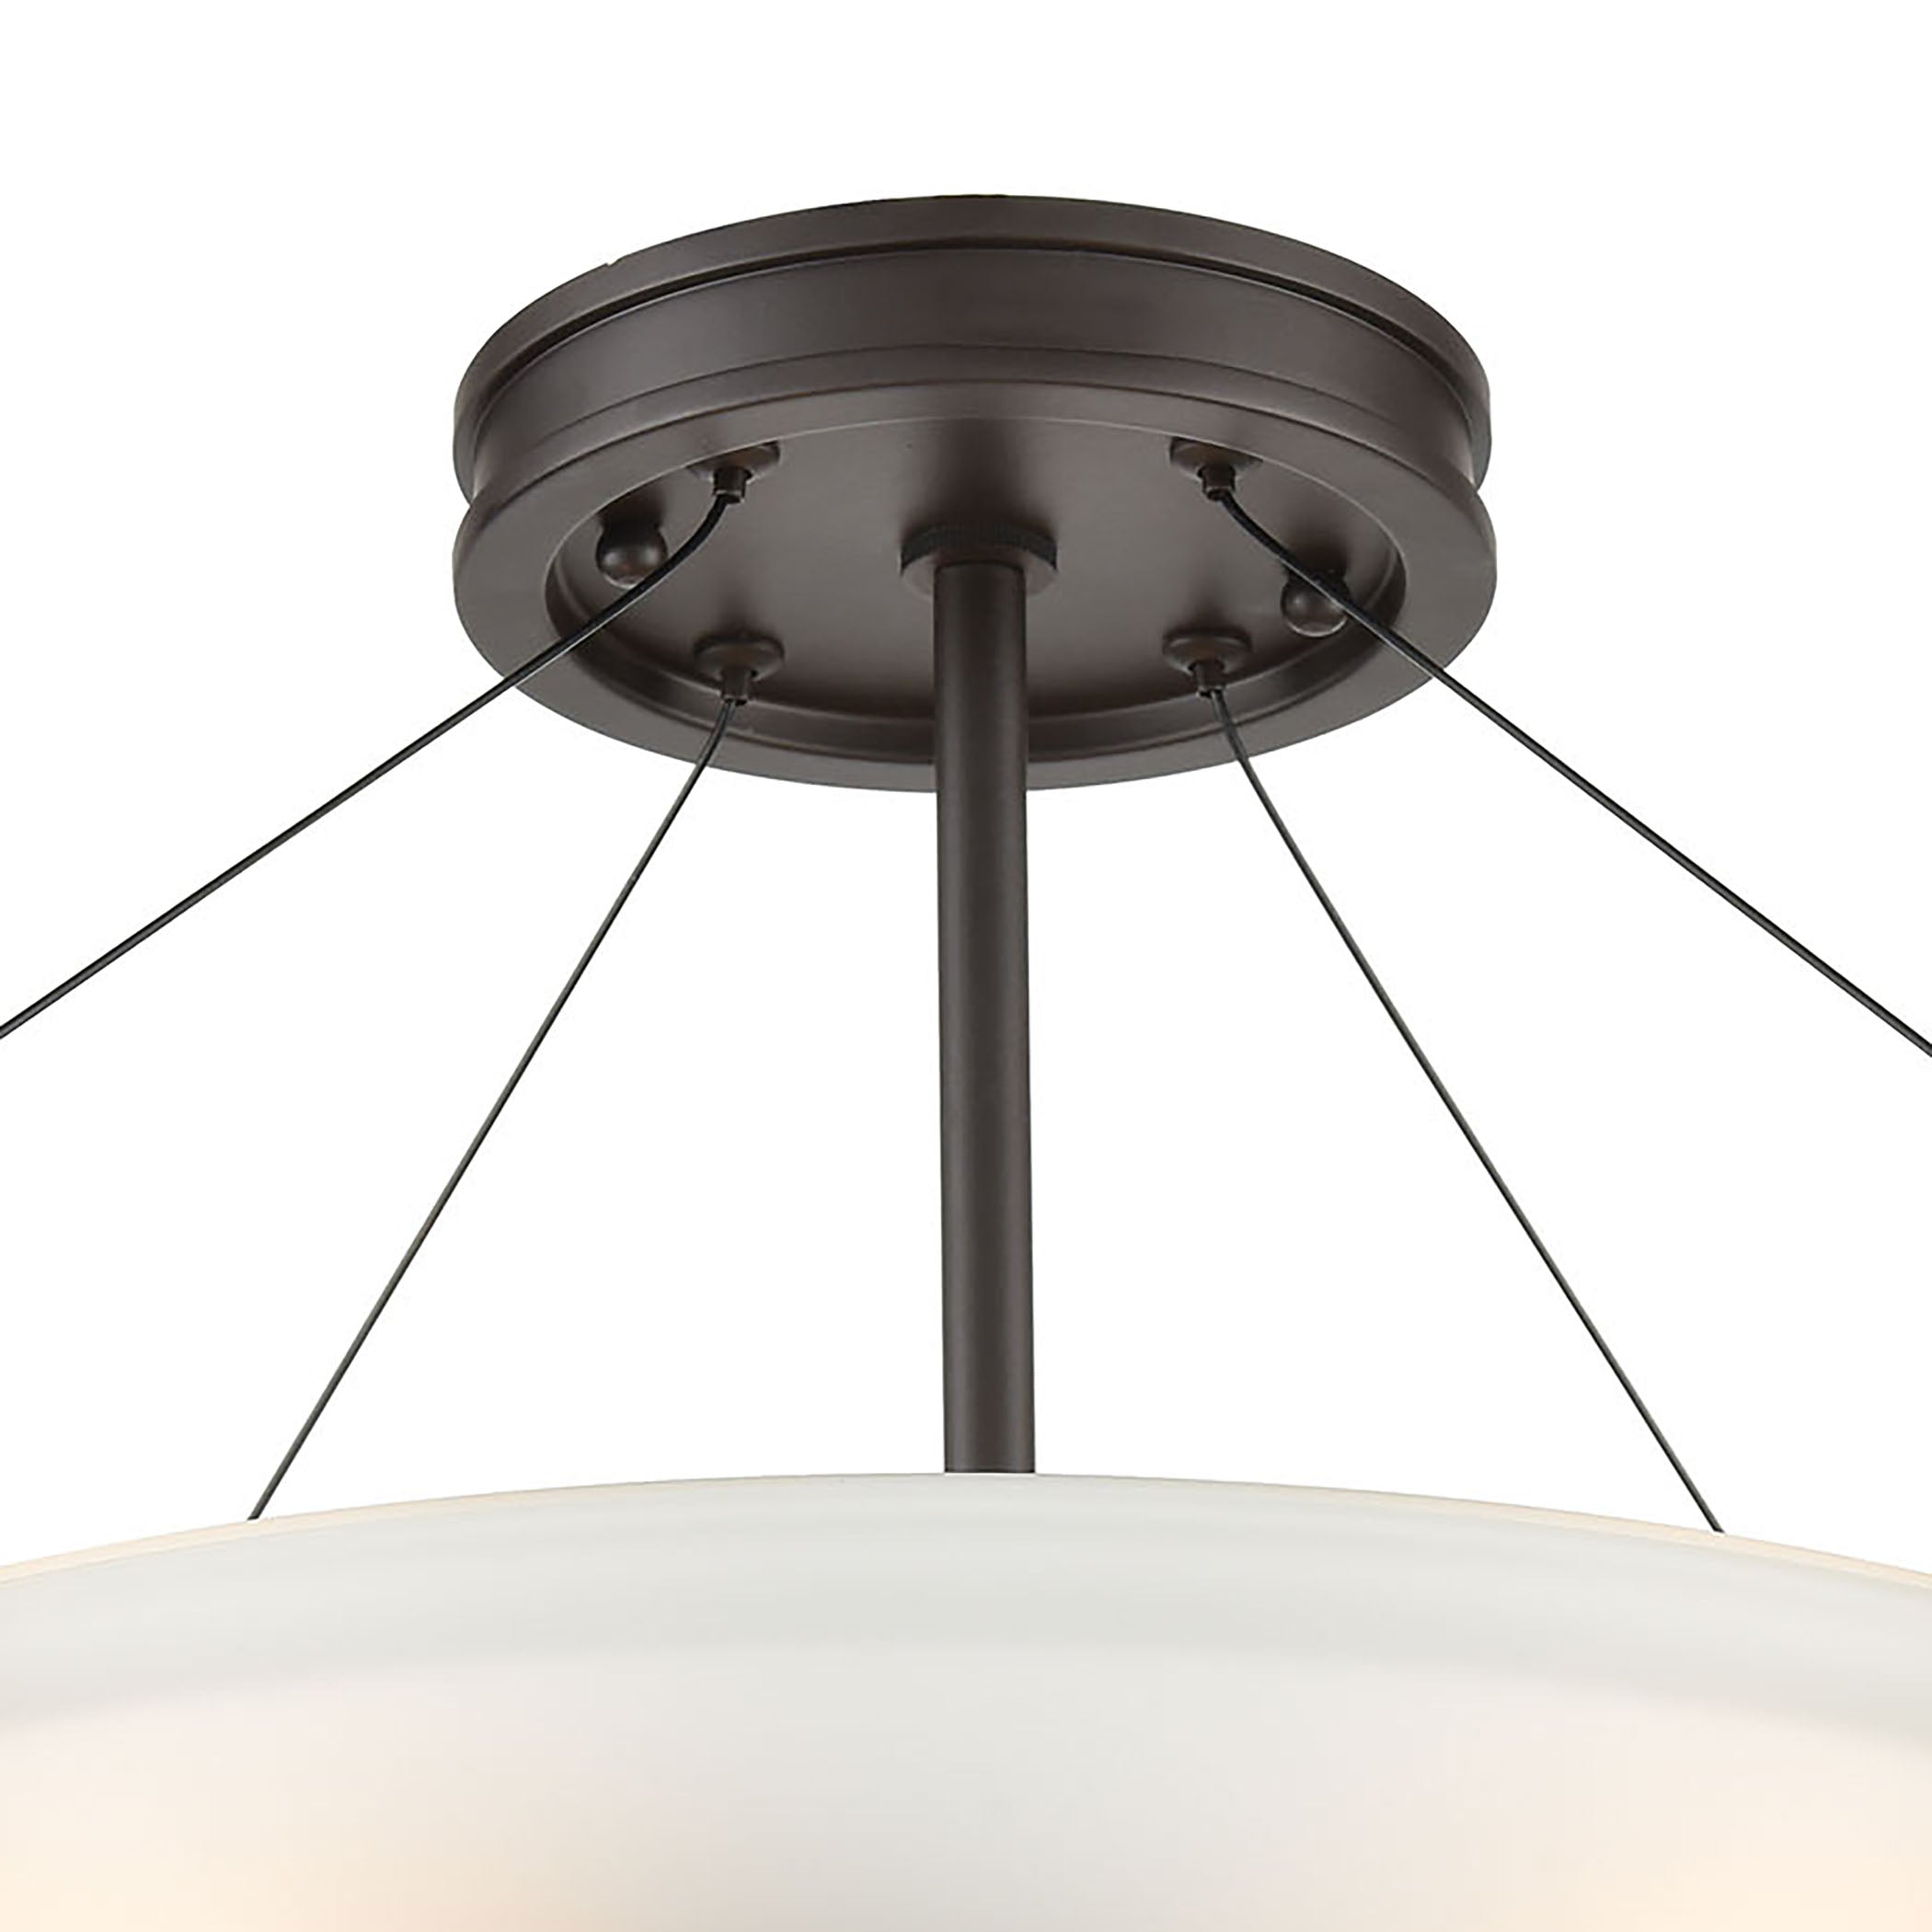 ELK Lighting 55082/3 Roebling 3-Light Semi Flush Mount in Oil Rubbed Bronze with Frosted Glass